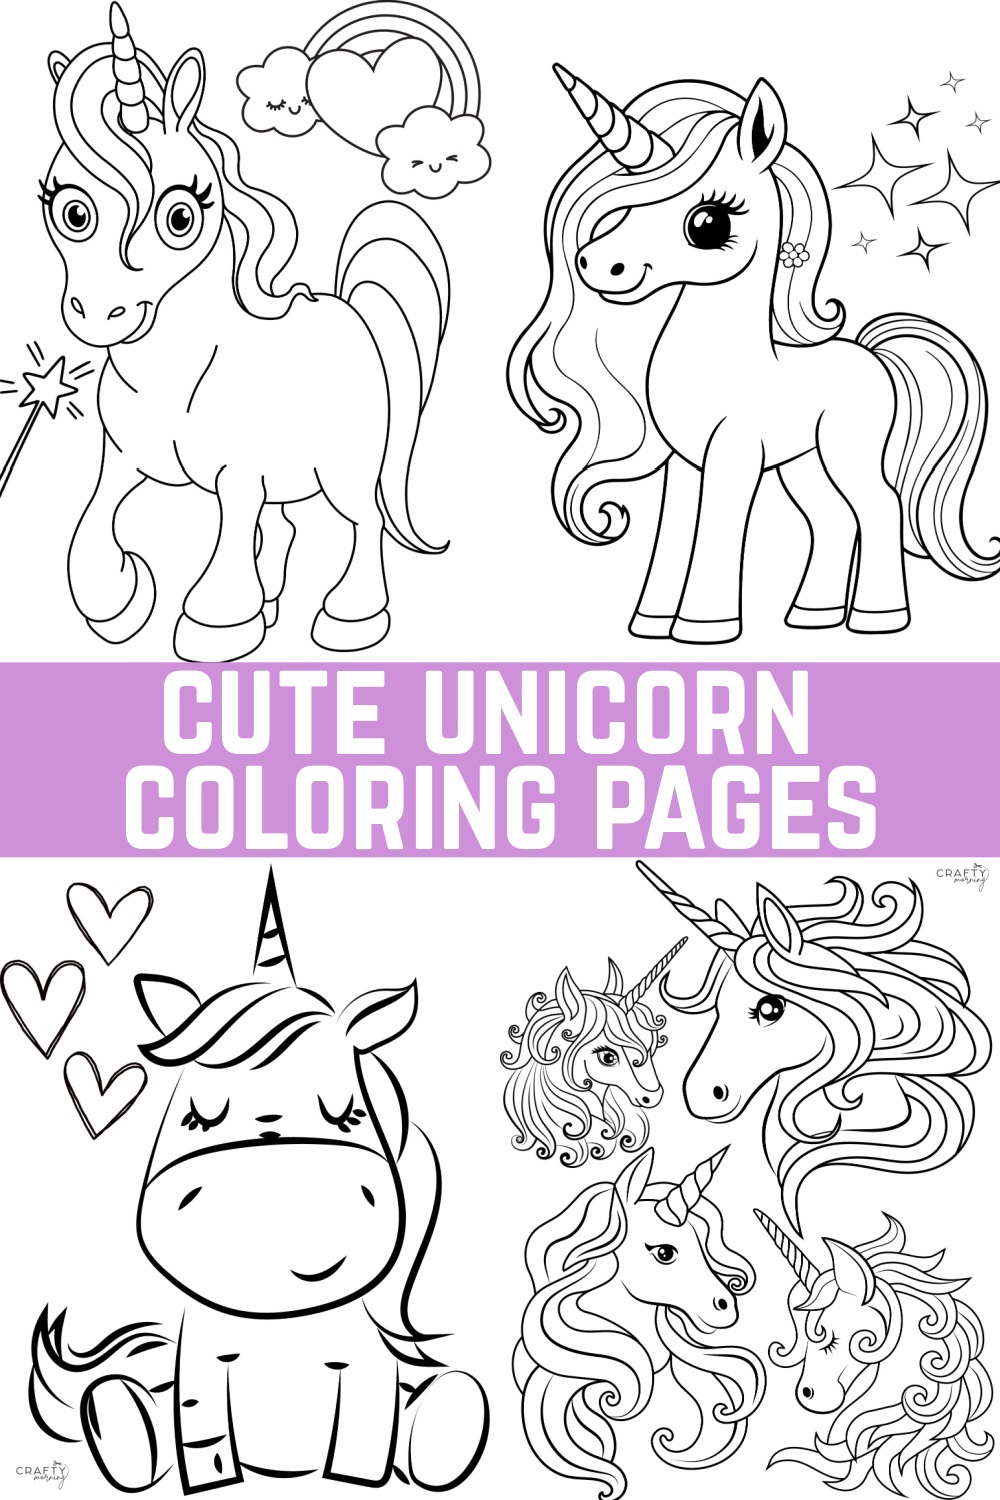 Coloring pages of a unicorn